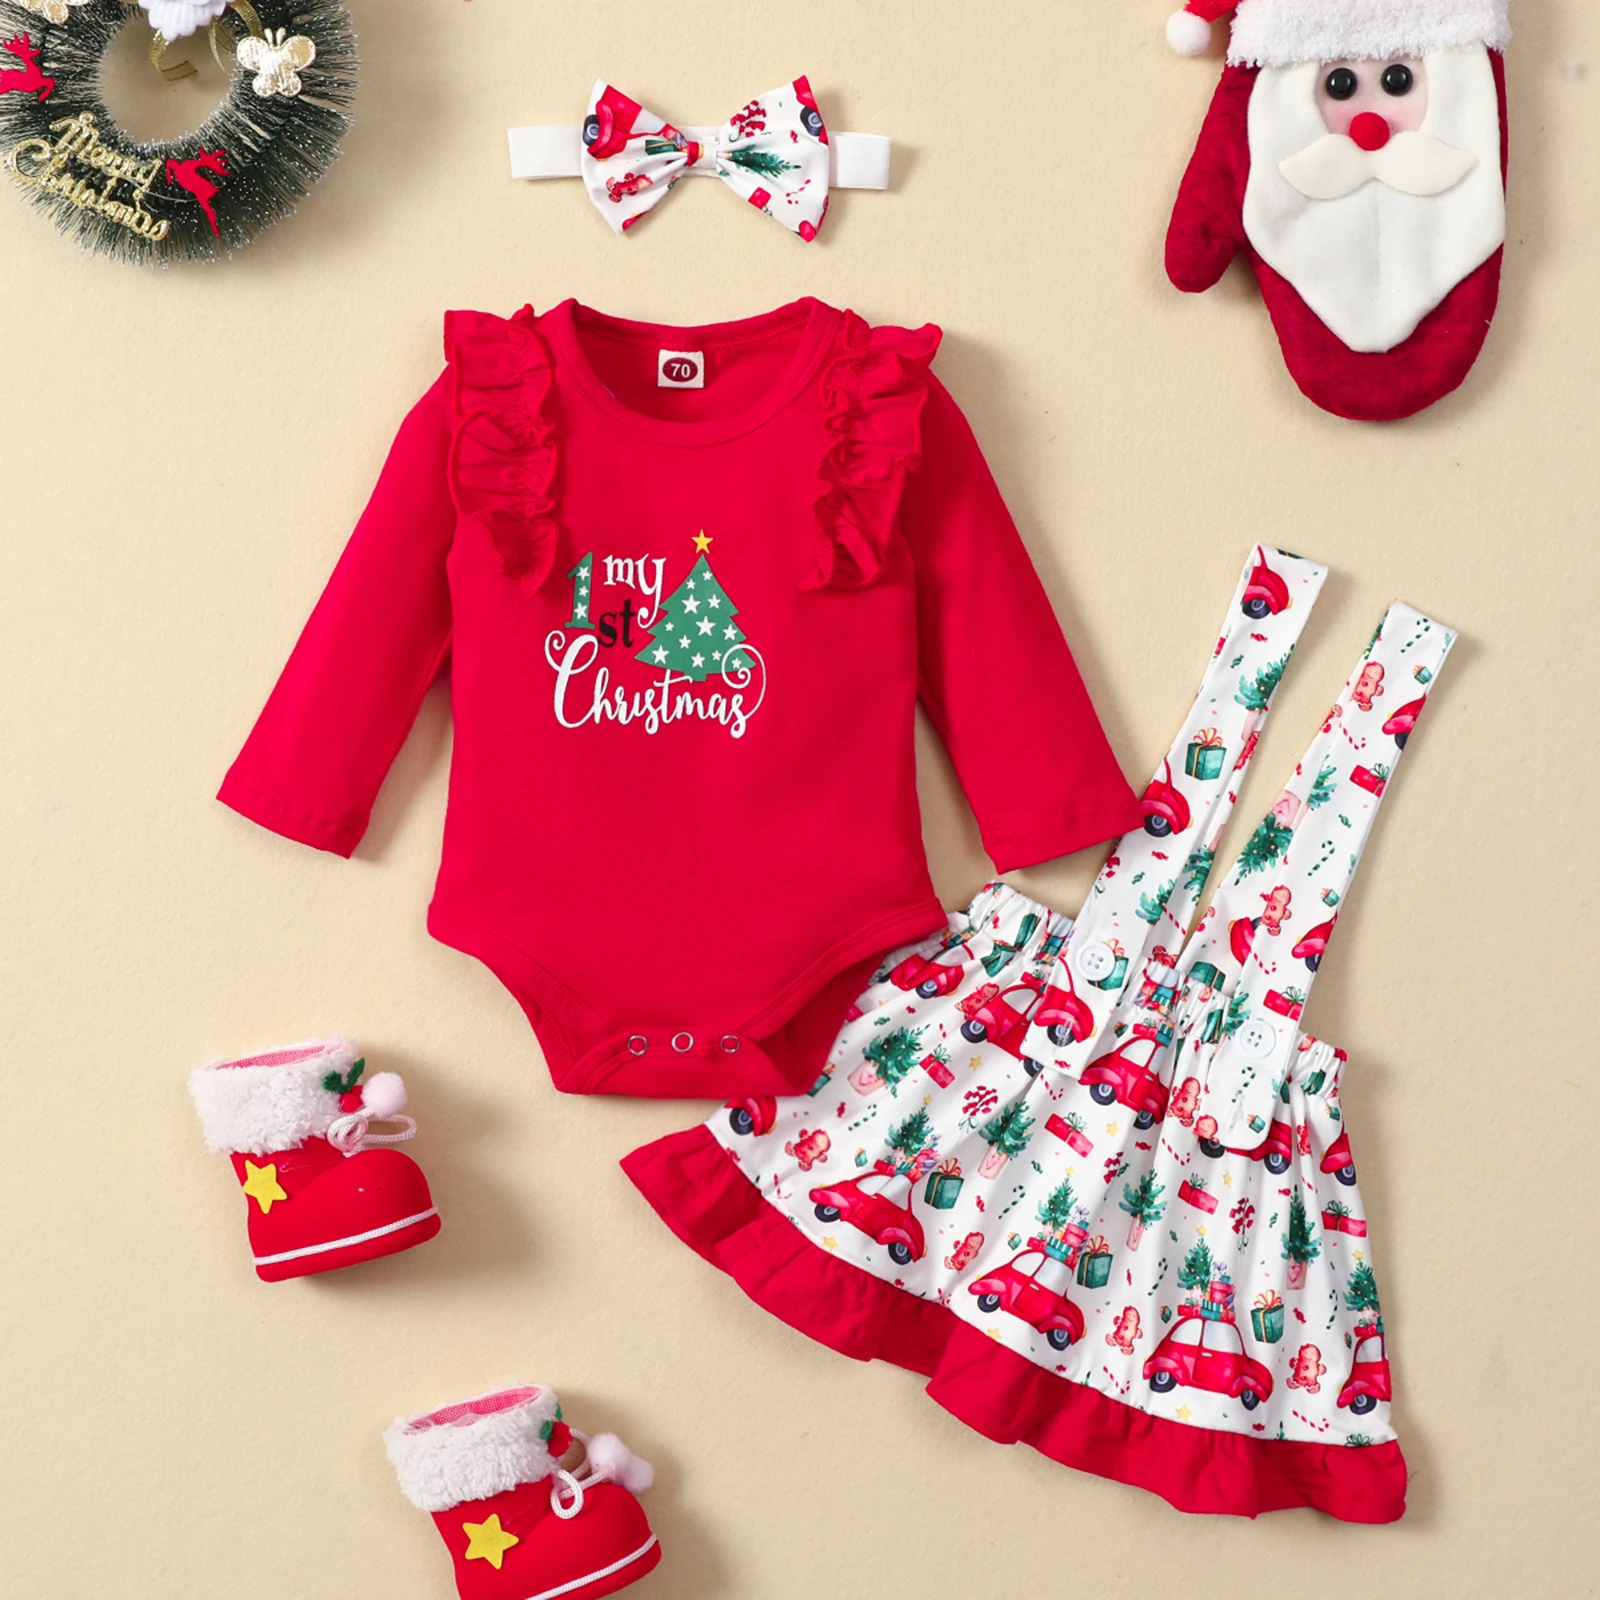 

Ma&Baby 0-24M My 1st Christmas Newborn Baby Girl Red Clothes Set Letter Romper Ruffles Car Print Skirts Outfits Xmas Costume